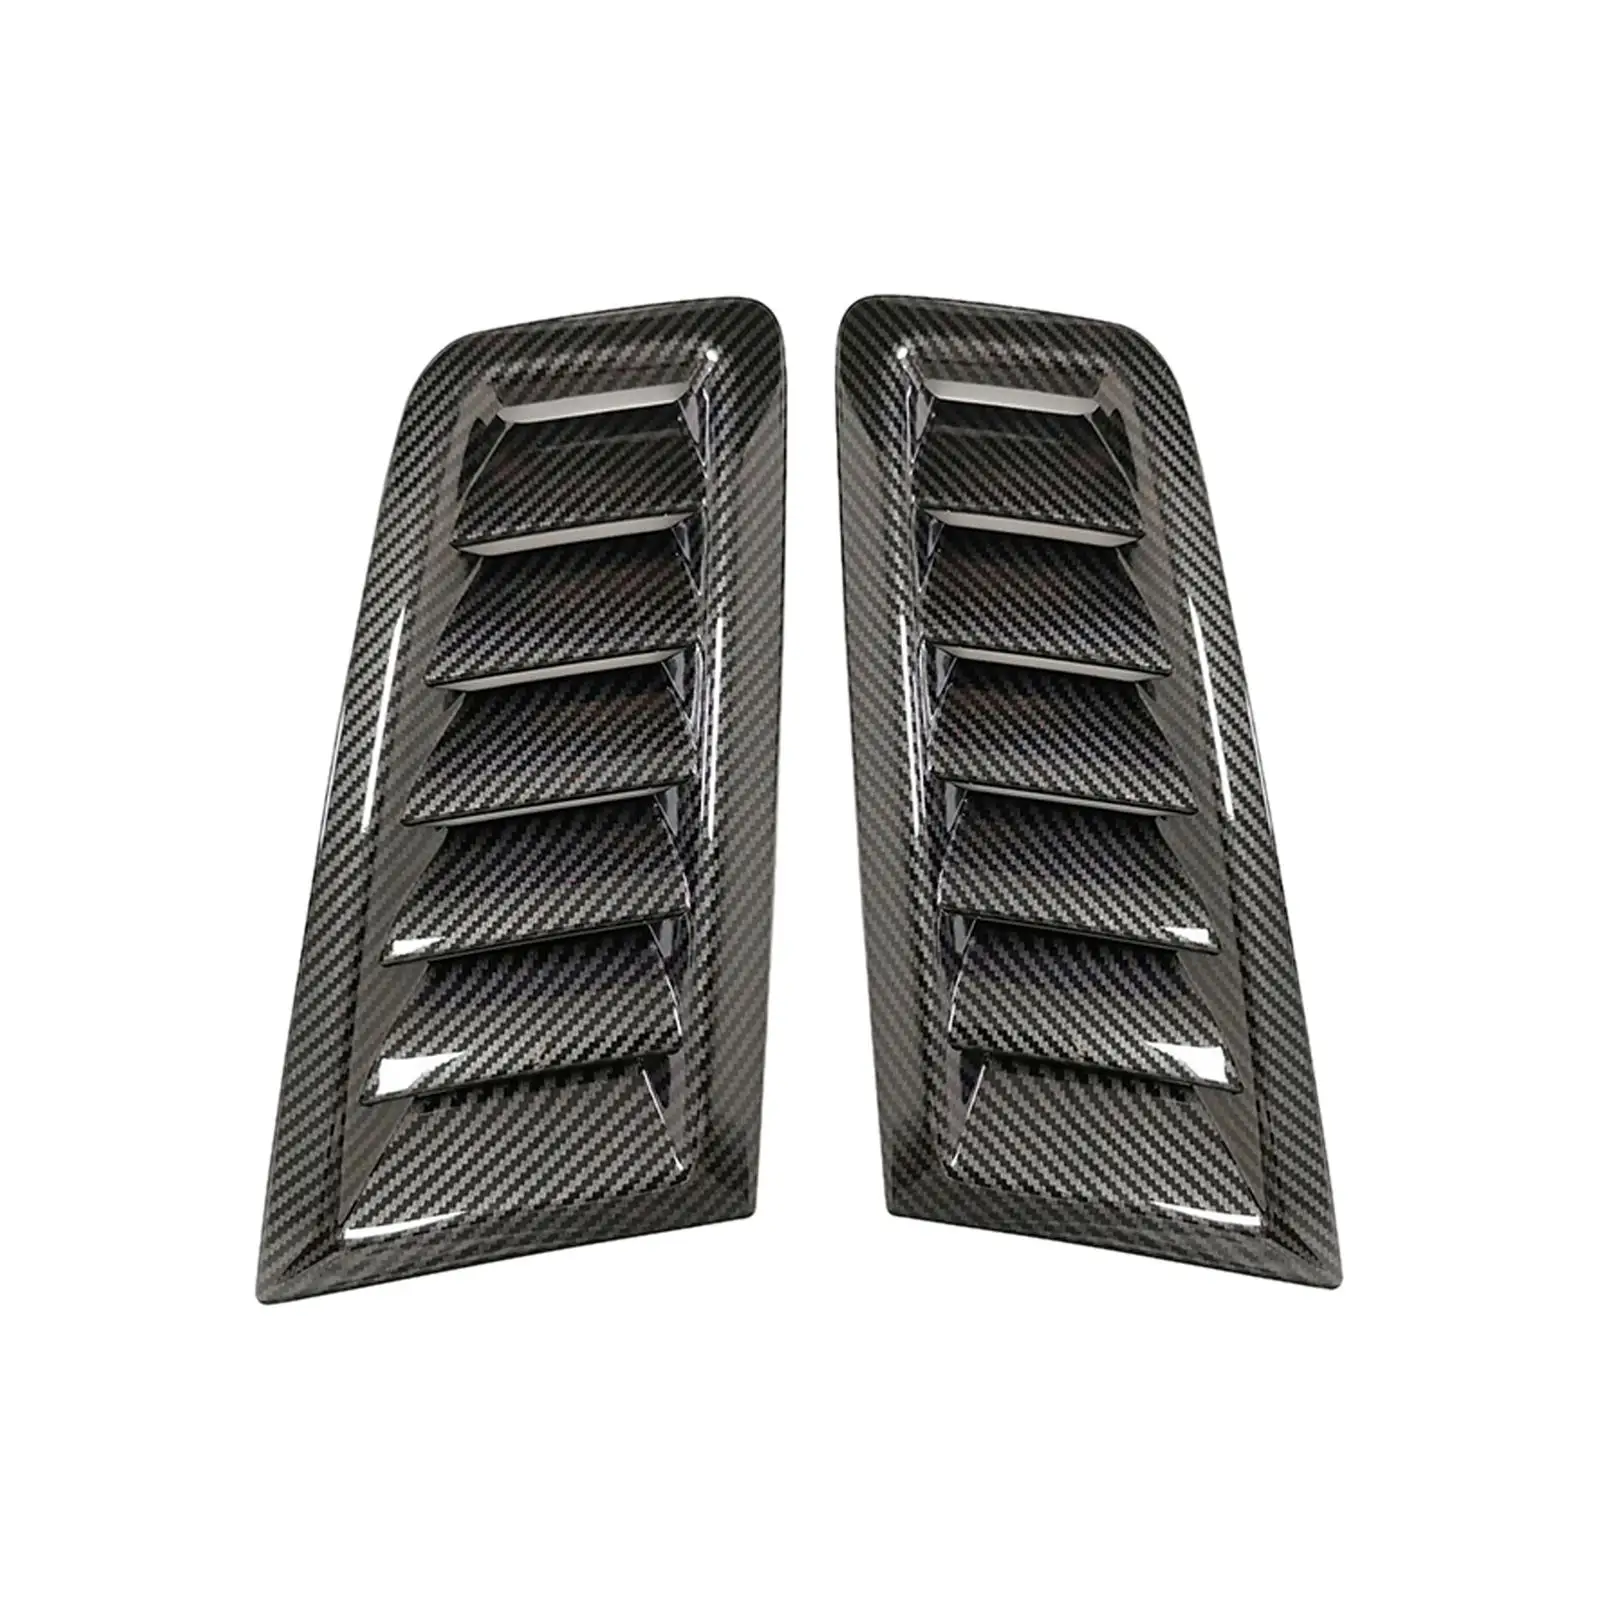 2Pcs Car Hood Vent Scoops Replace Parts Modified Accessory Air Flow Intake Hoods